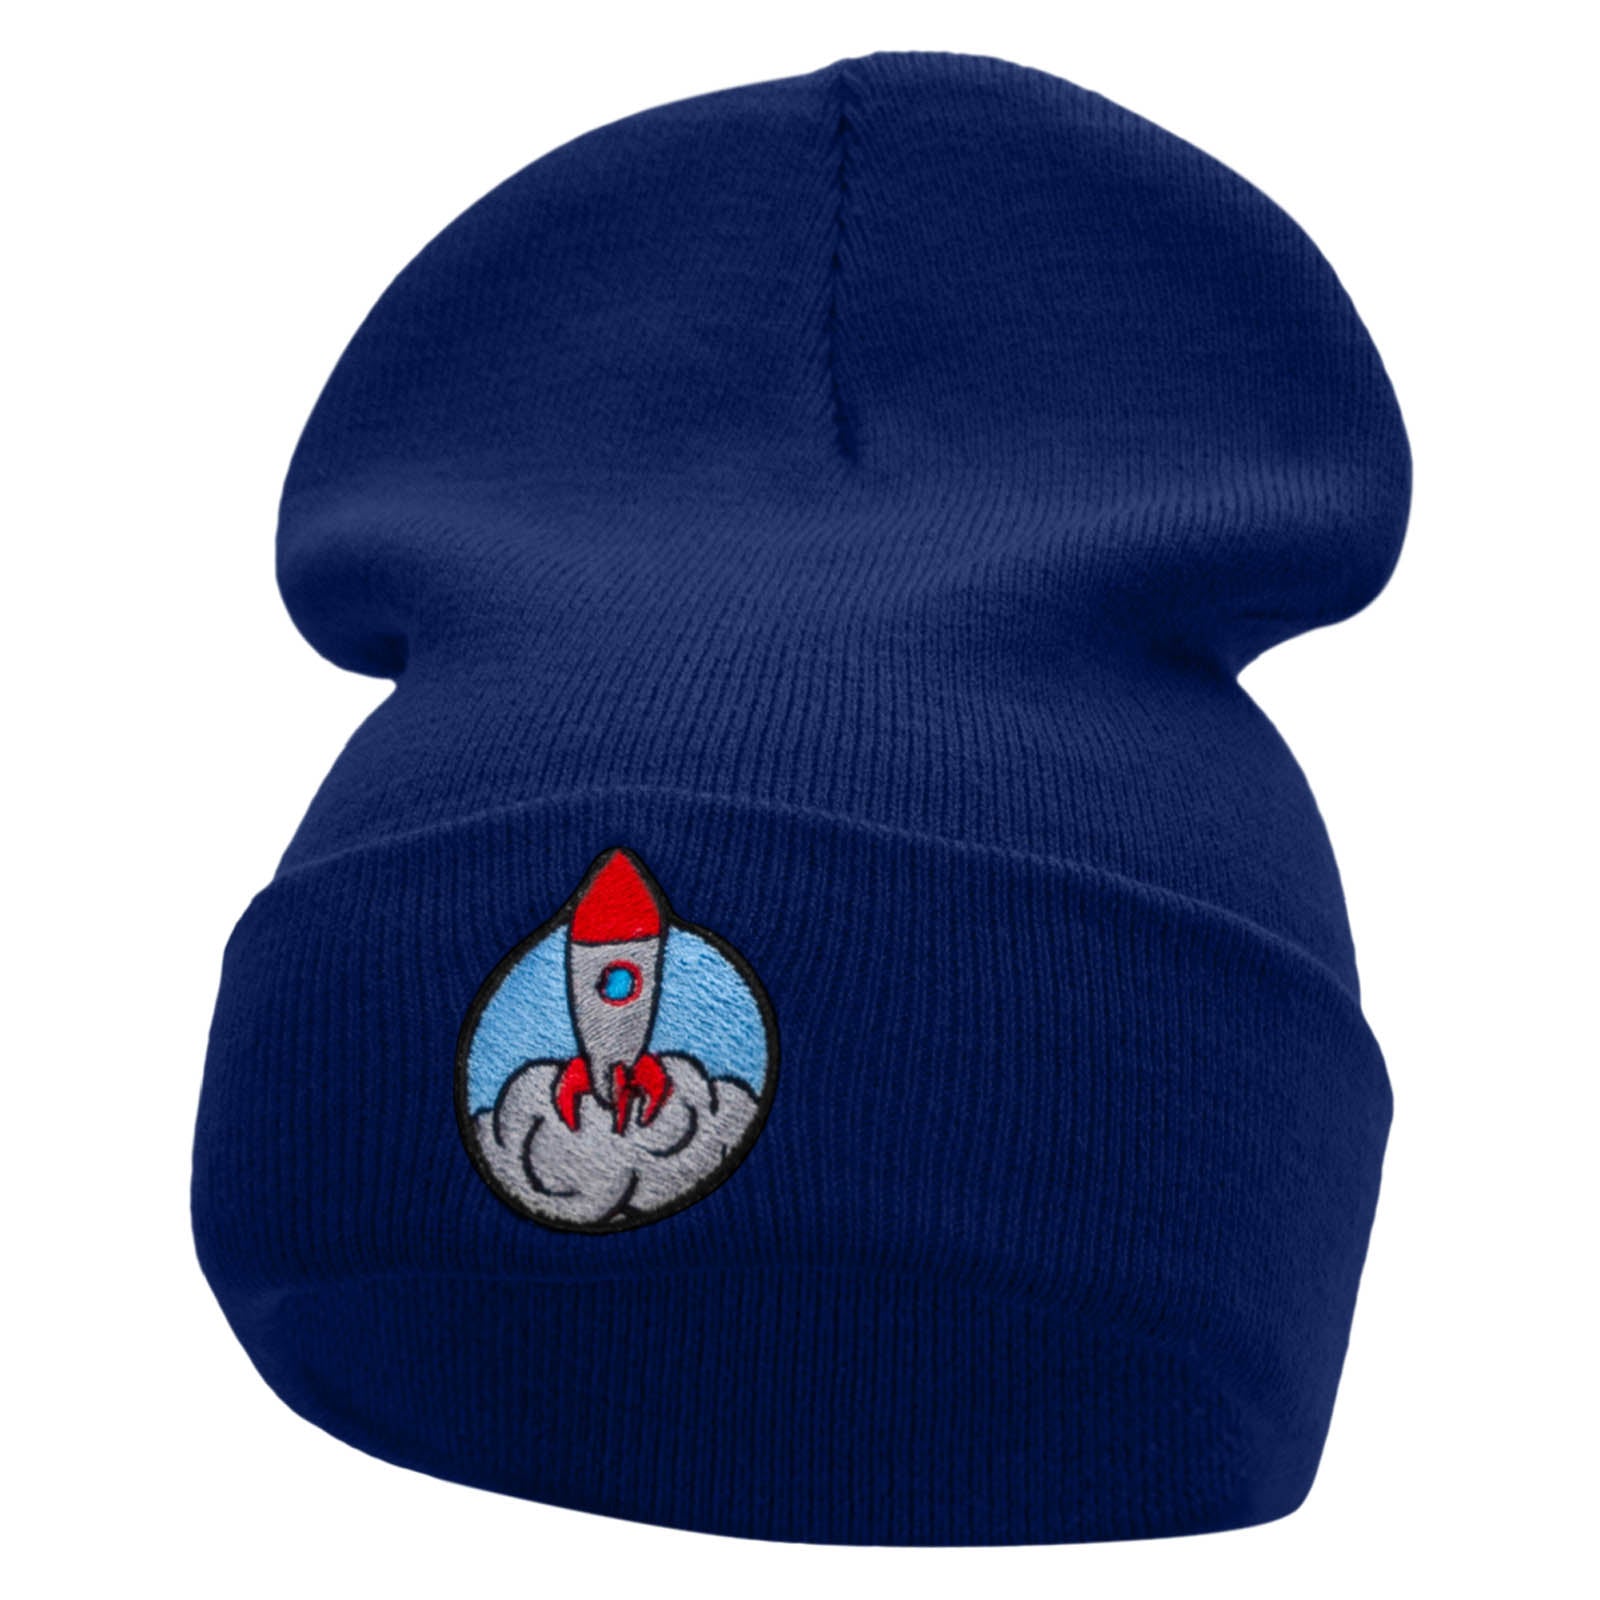 Rocket Takeoff Embroidered 12 Inch Long Knitted Beanie - Royal OSFM